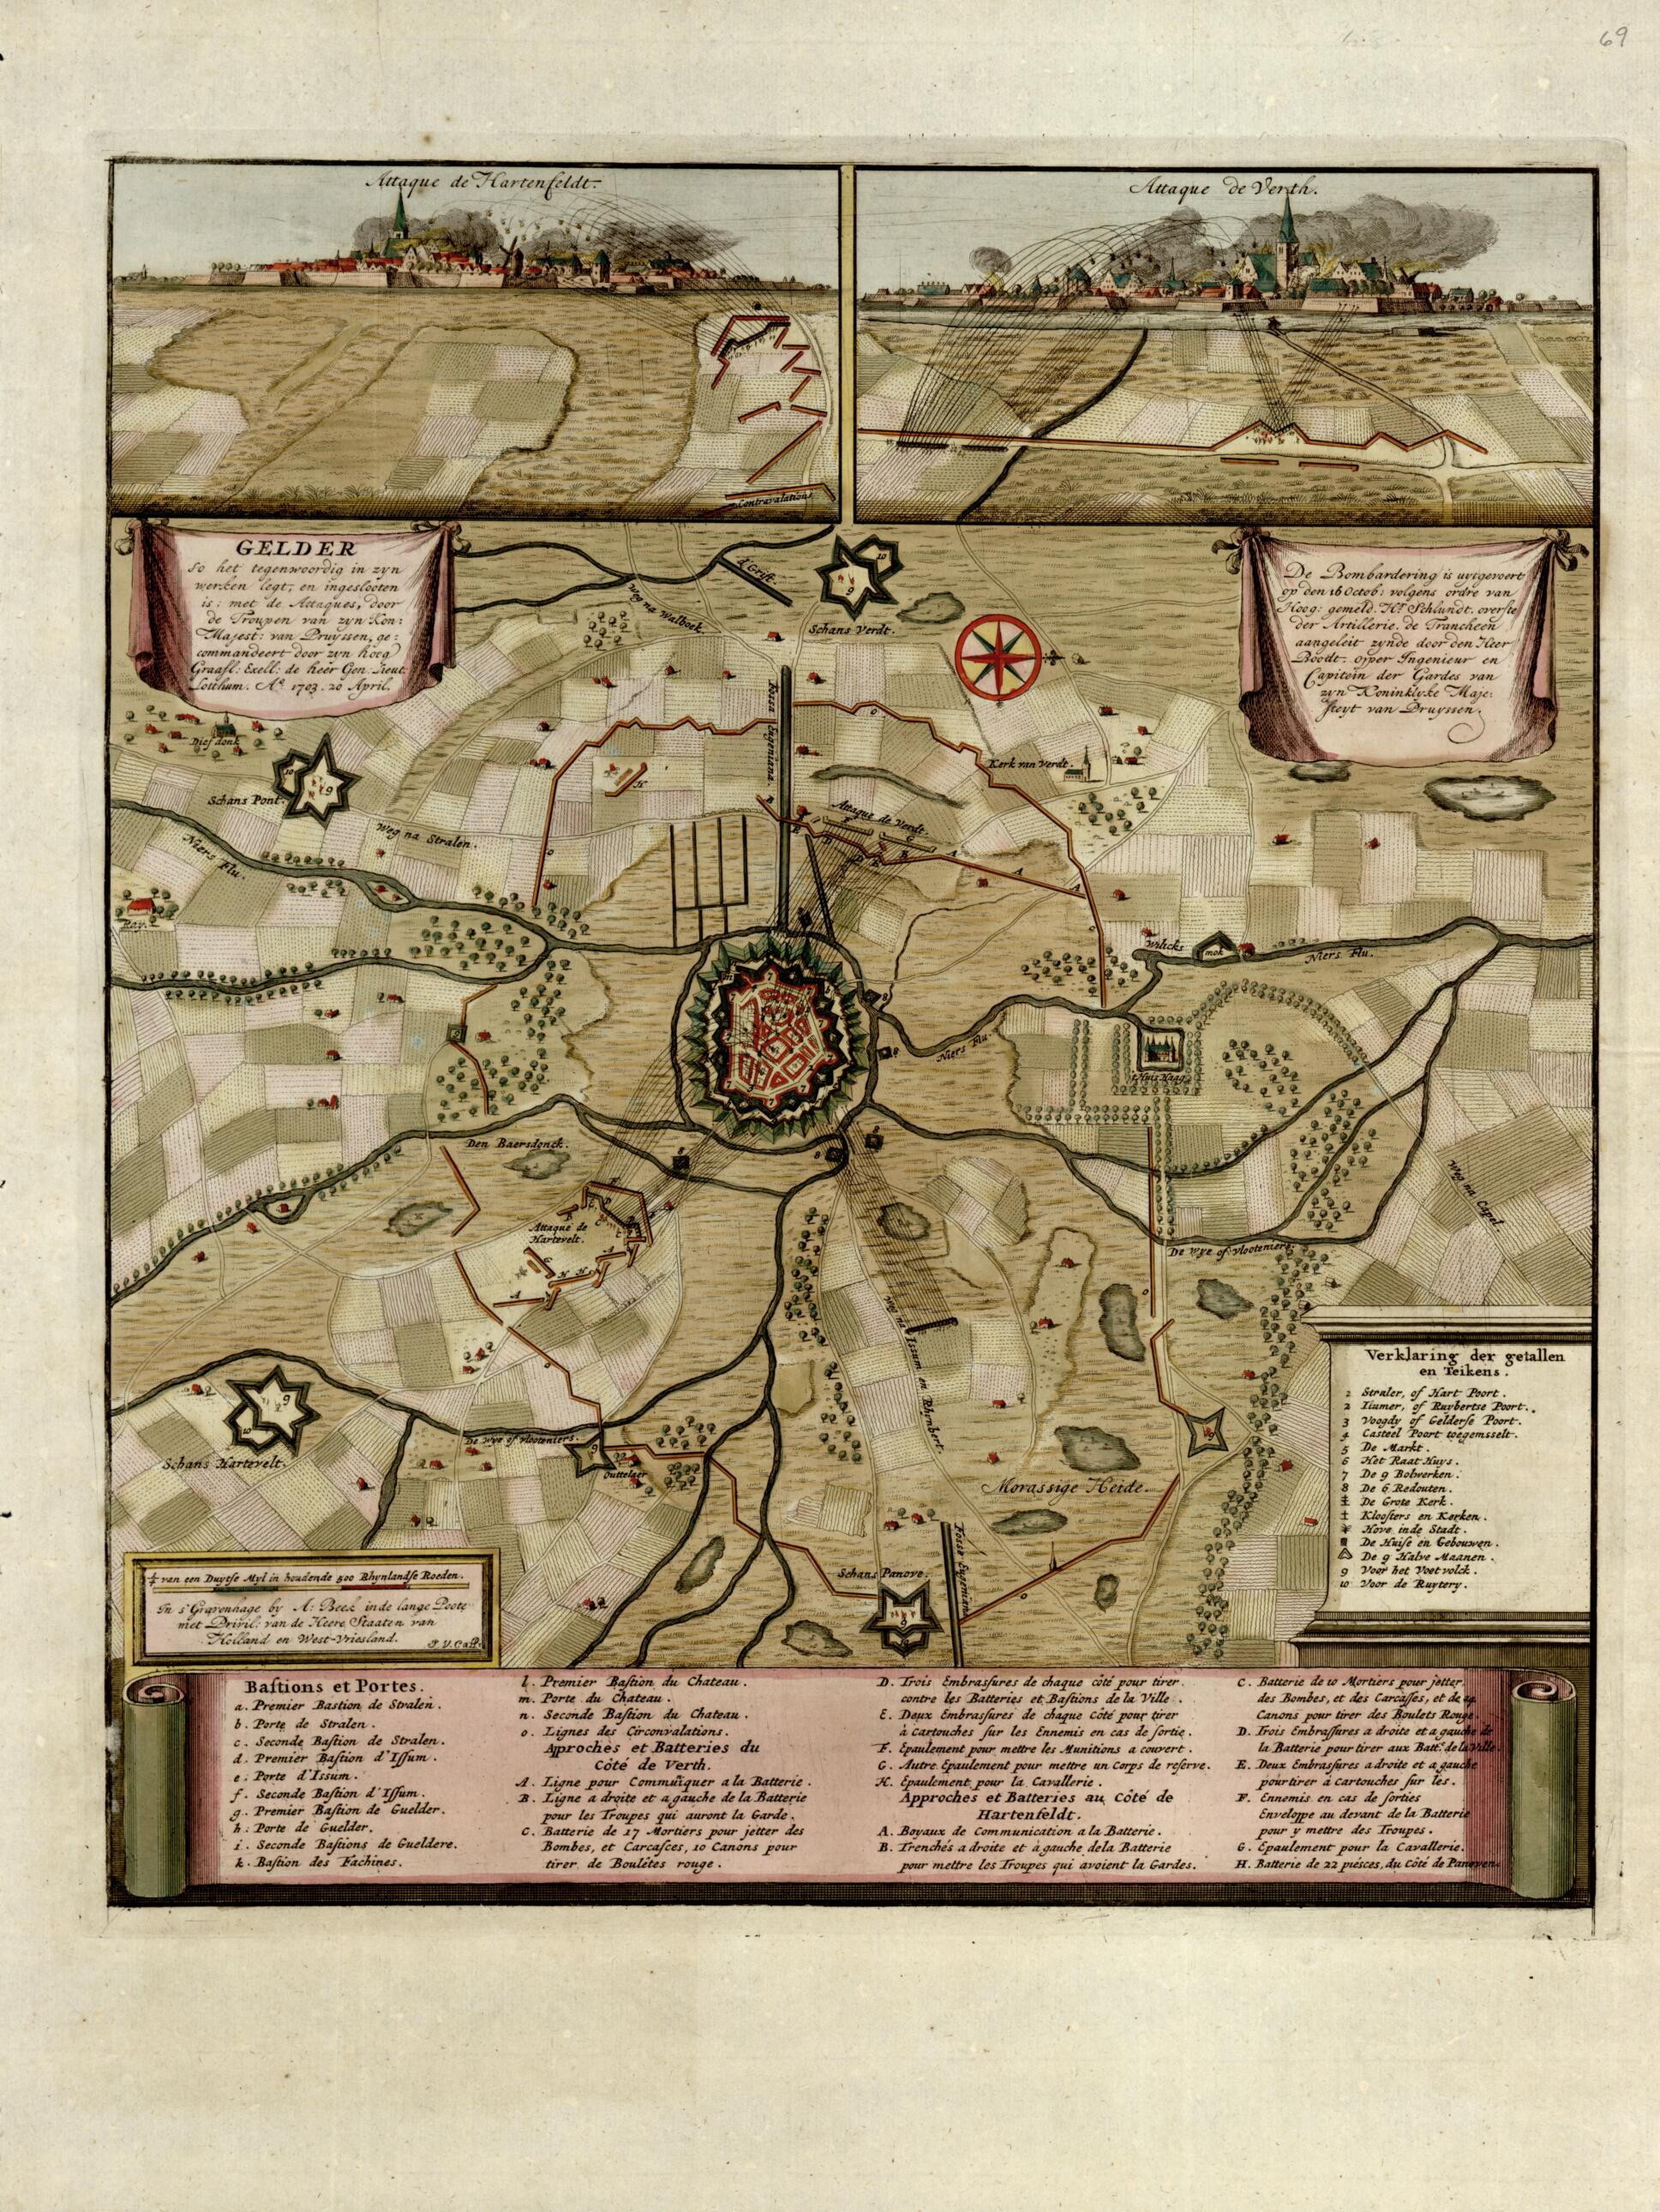 This old map of Gelder from a Collection of Plans of Fortifications and Battles, 1684-from 1709 from 1709 was created by Anna Beeck in 1709